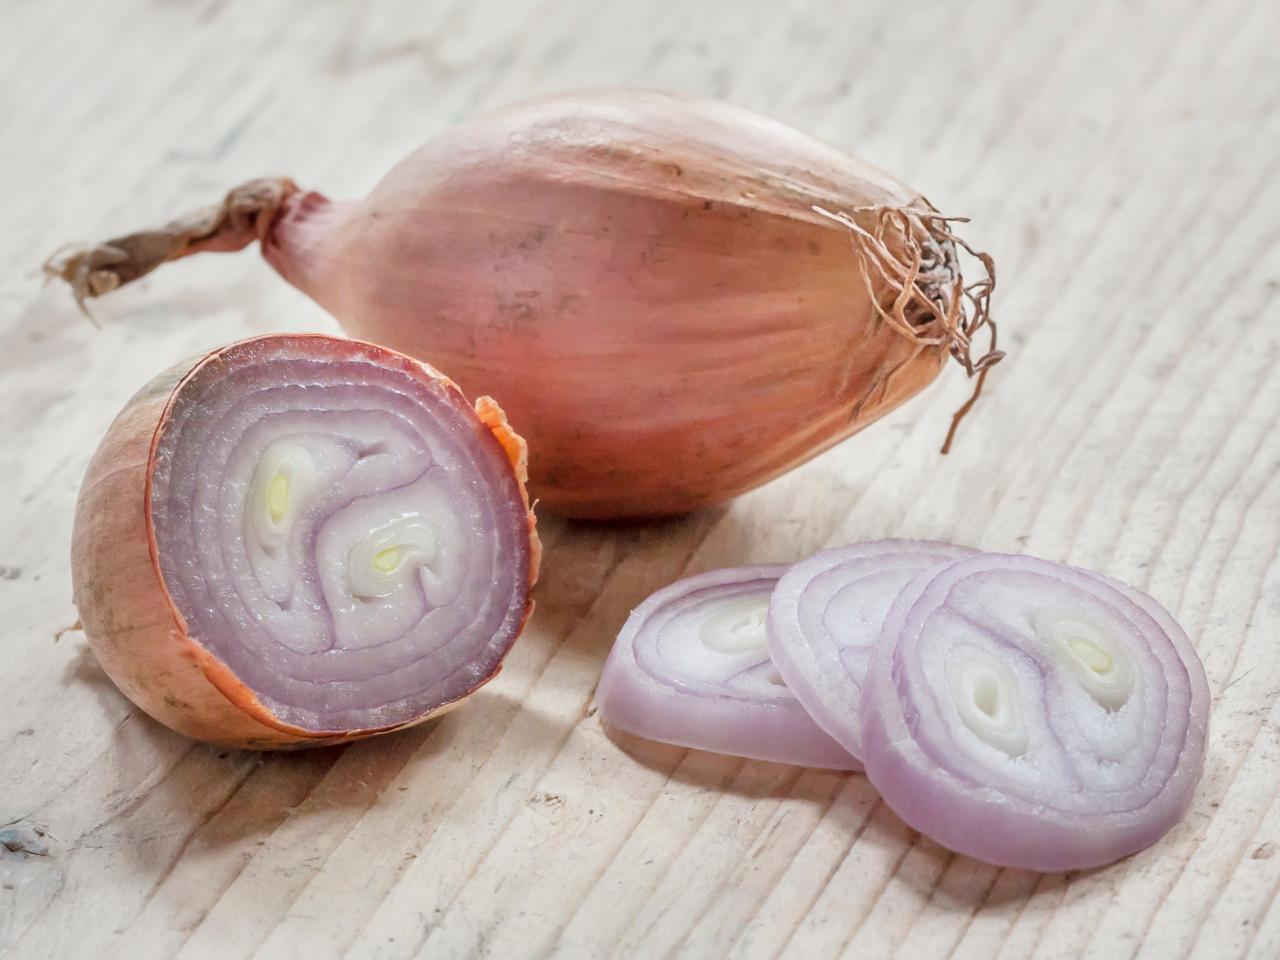 What Is a Shallot & What Does It Taste Like?